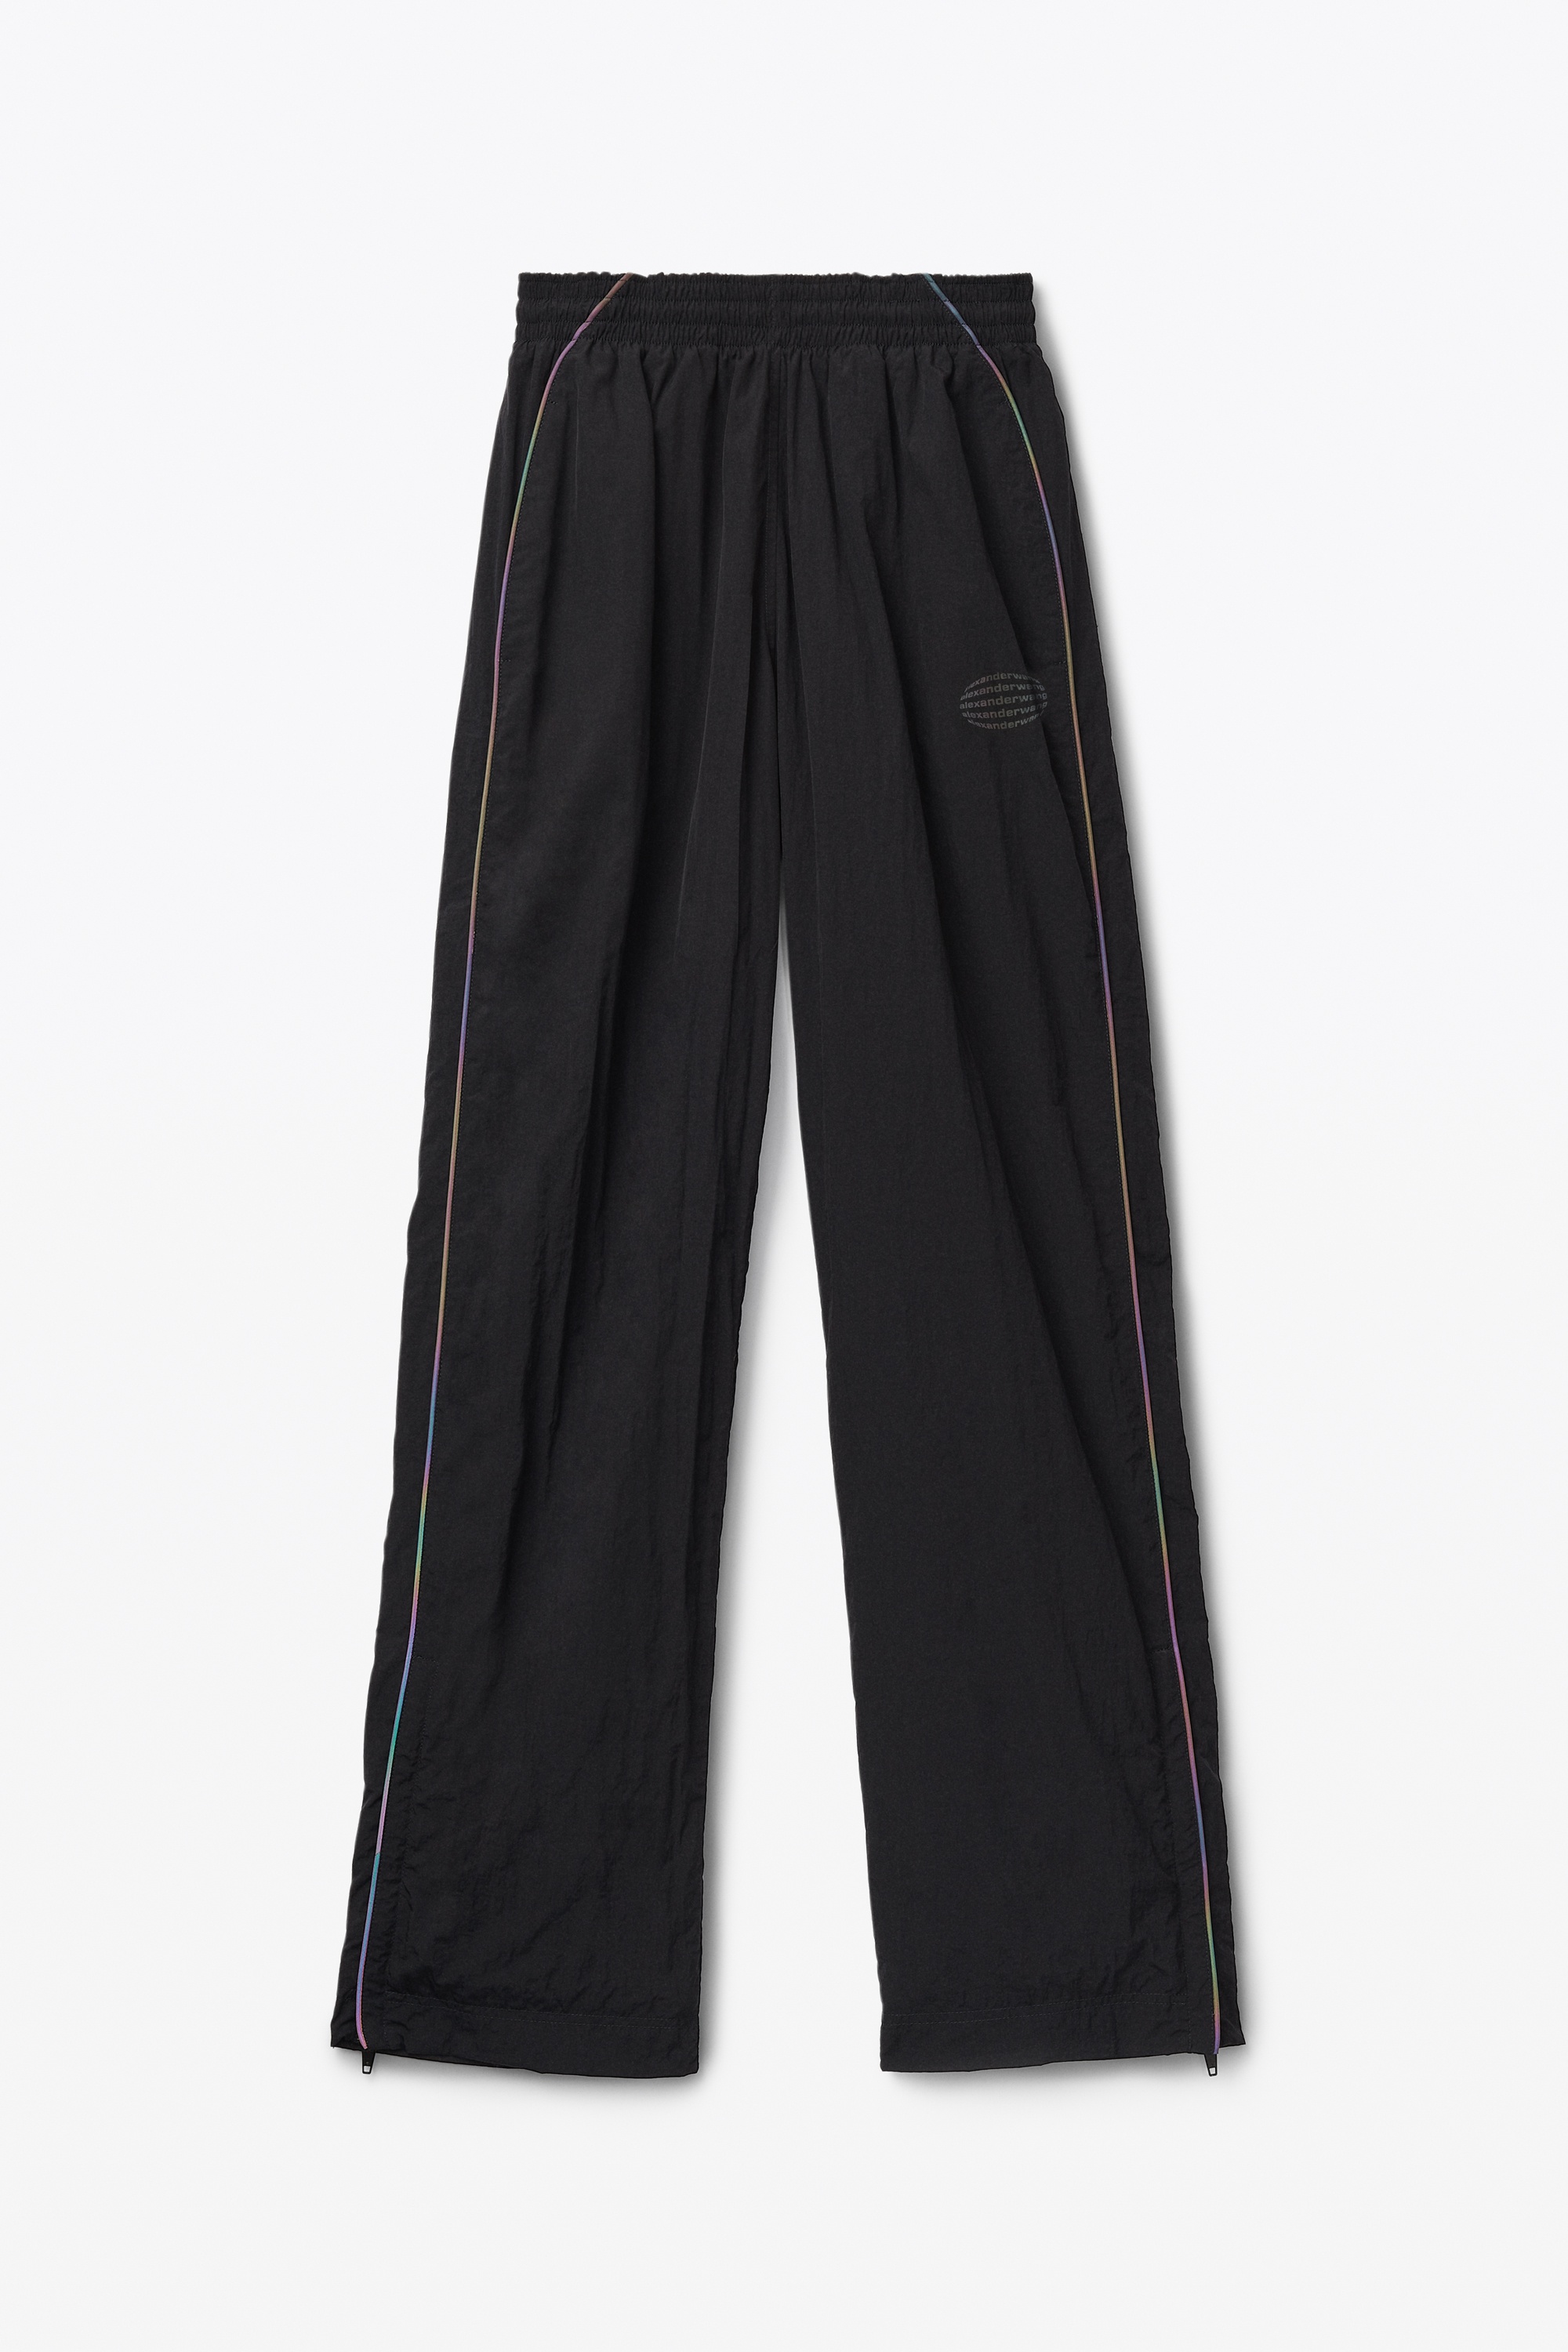 TRACK PANT IN HEAVY WASHED NYLON - 1